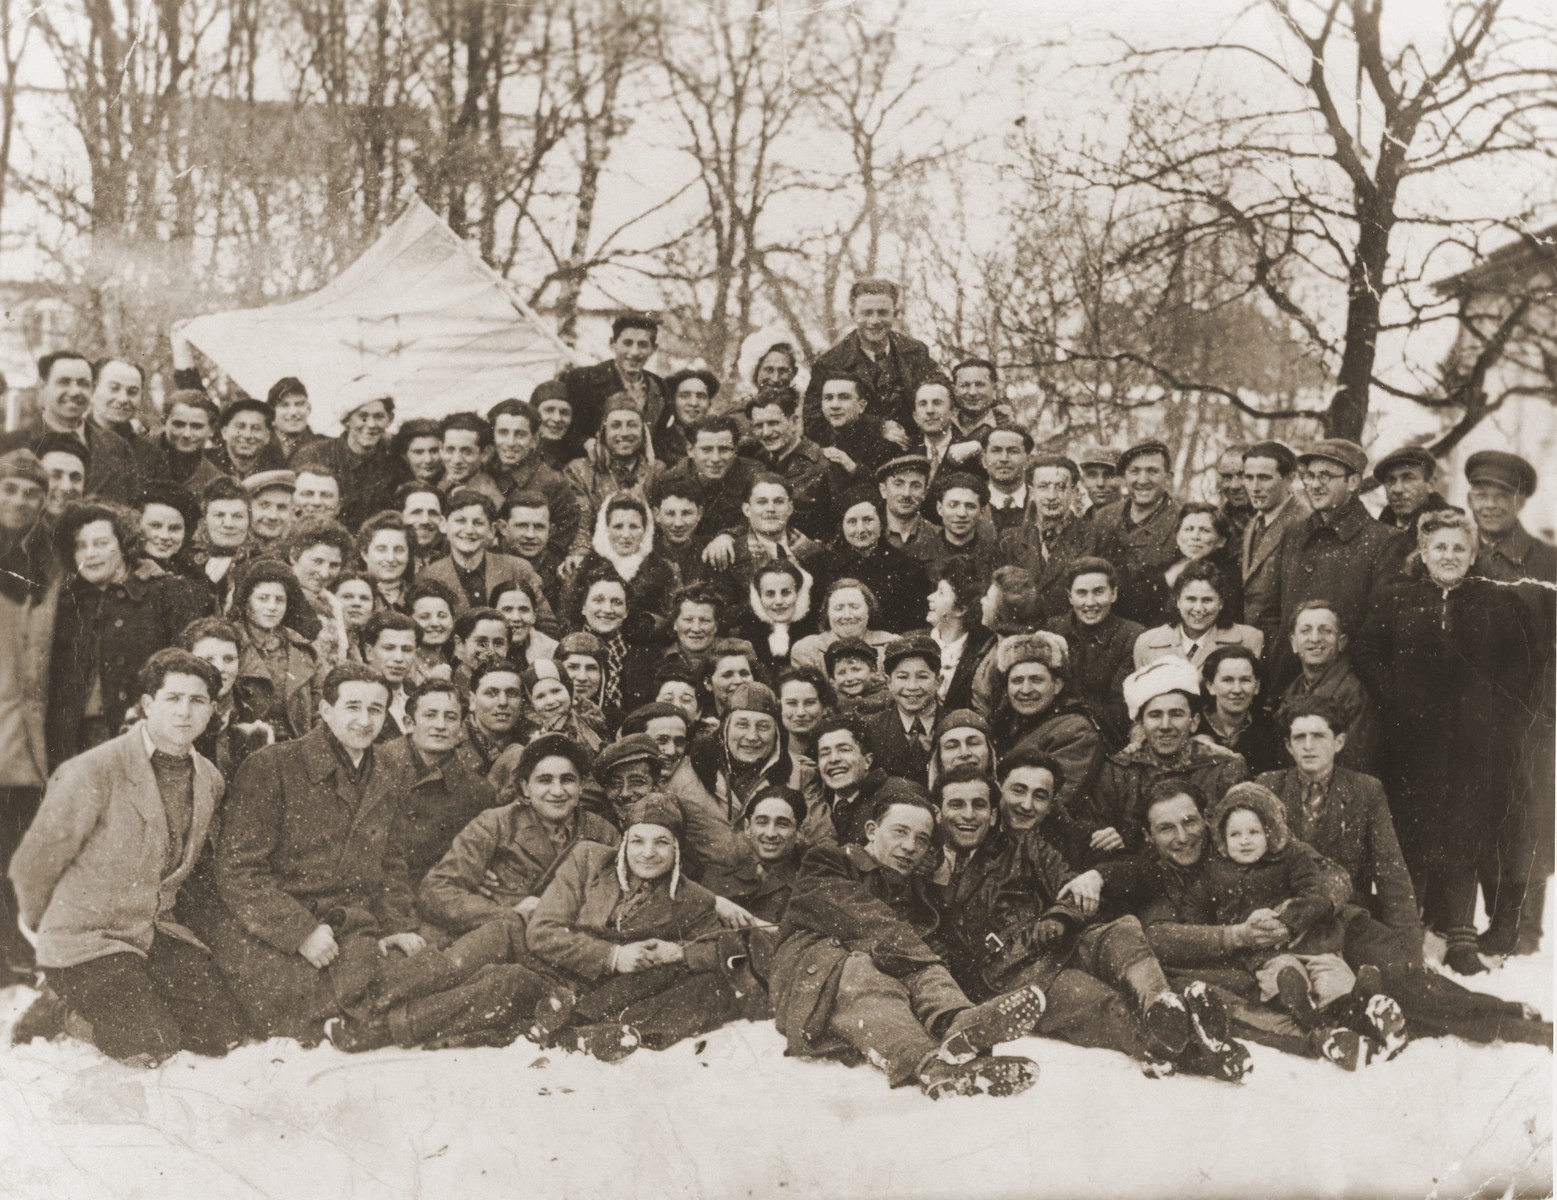 Group portrait of the members of the Zionist hachshara, Kibbutz Negev, in the Landsberg displaced persons camp, which was made up largely of former partisans.

Among those pictured is Tewel Leibowitz.